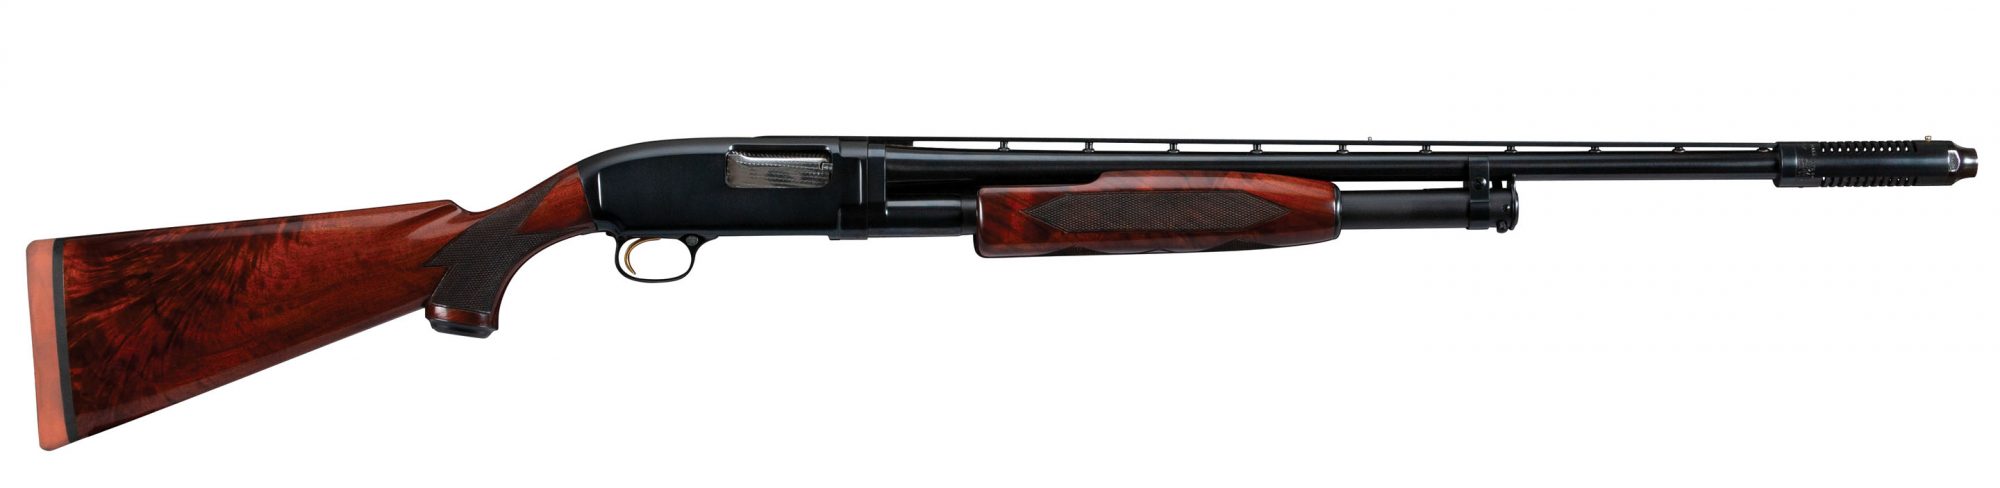 Photo of a Winchester Model 12 from 1958 after restoration work by Turnbull Restoration of Bloomfield, NY